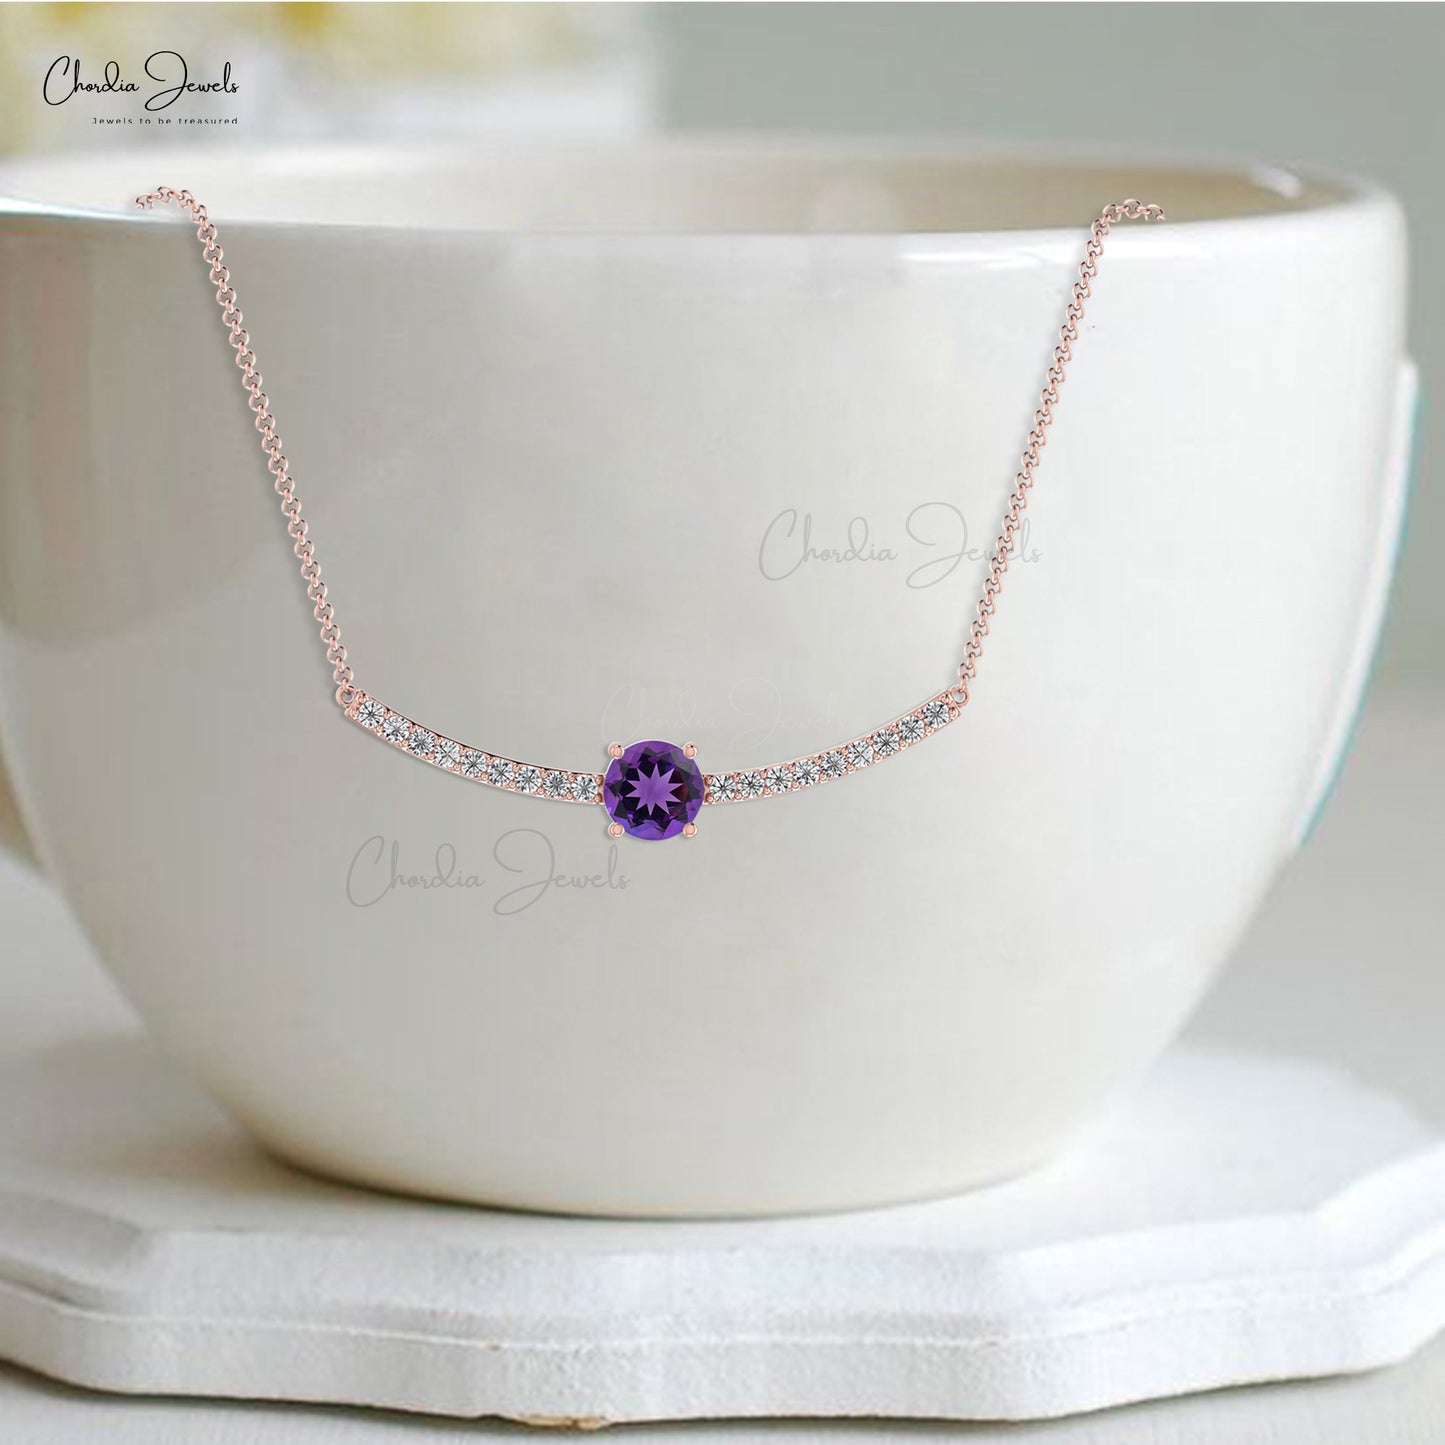 Natural Amethyst Necklace, 14k Solid Gold Diamond Necklace, 5mm Round Gemstone Necklace Gift for Her